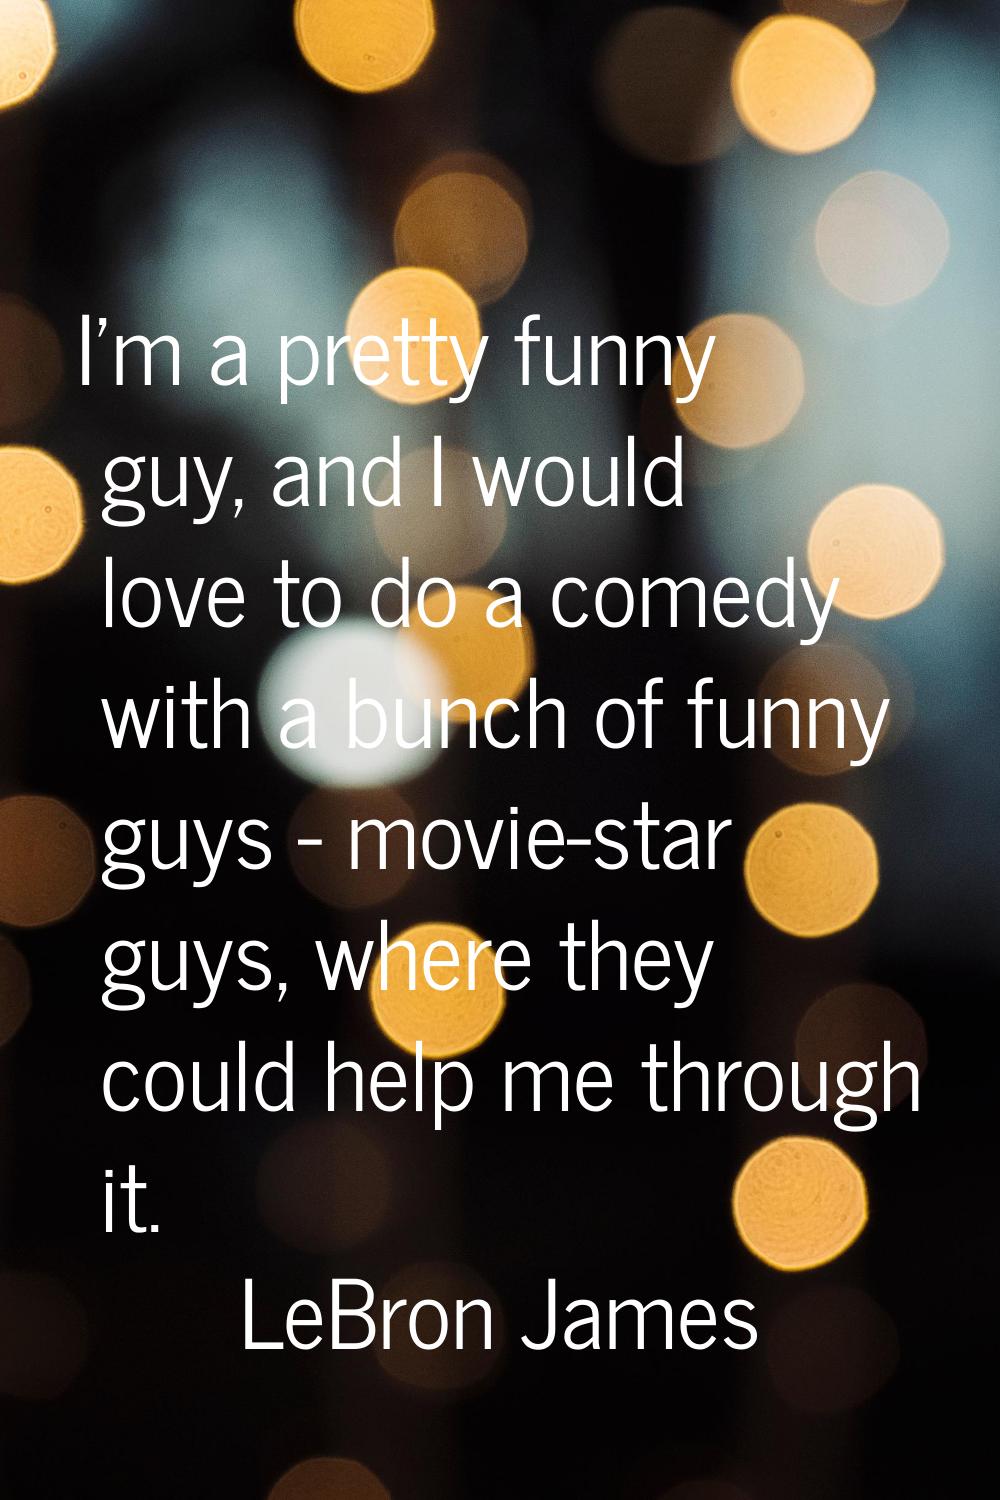 I'm a pretty funny guy, and I would love to do a comedy with a bunch of funny guys - movie-star guy